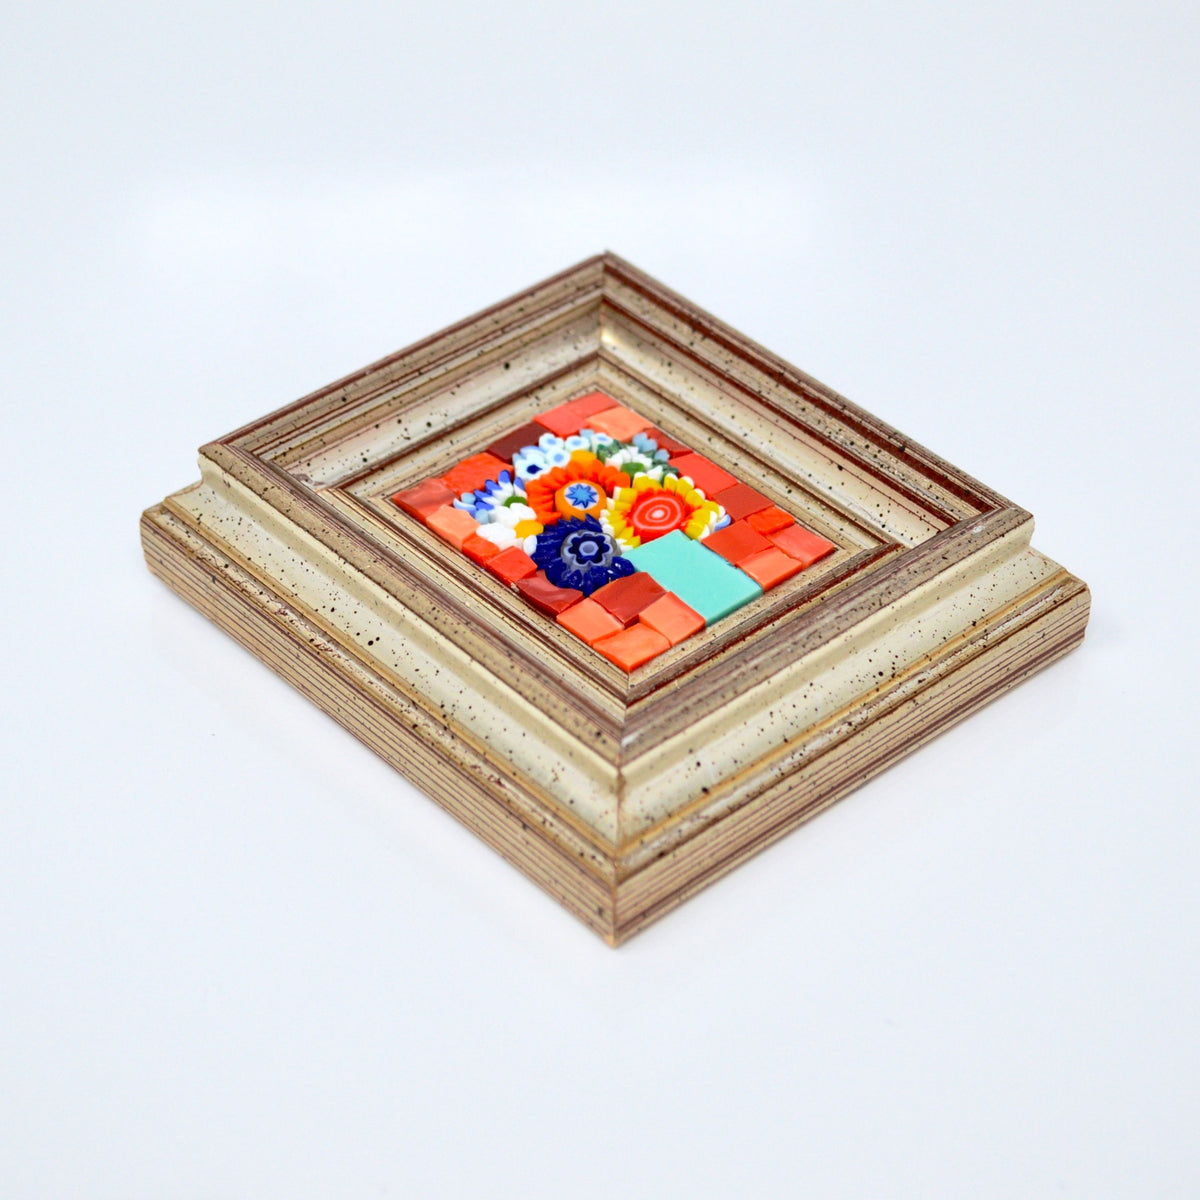 Miniature Framed Glass Floral Mosaic Art, Murano Glass, Red, Orange, Made in Italy - My Italian Decor